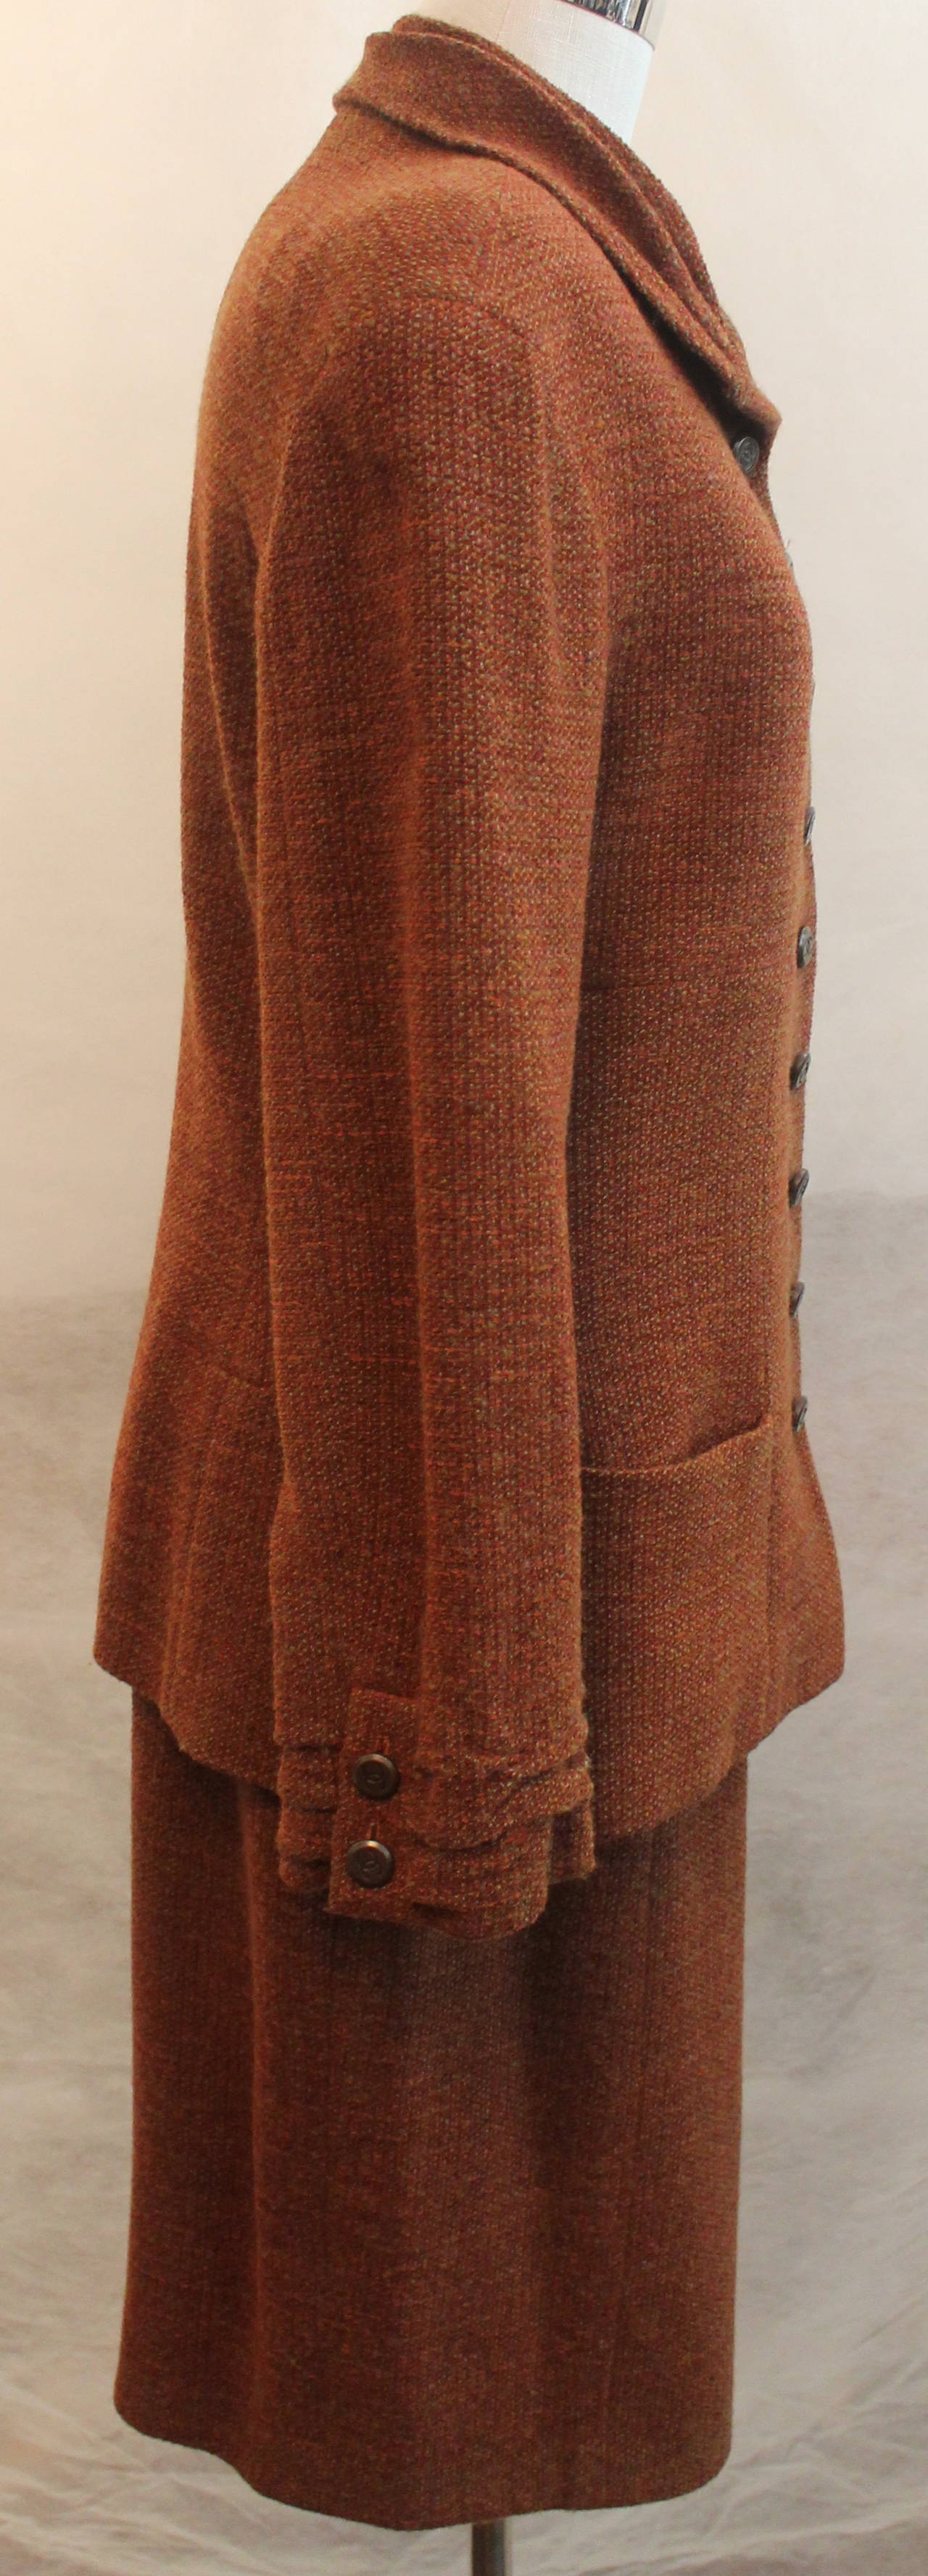 Chanel Rust Wool Blend Skirt Suit - 42 - Circa 1998  
Rouching on cuffs and collar, 2 bottom pockets. 
Measurements:
Jacket : Bust 38